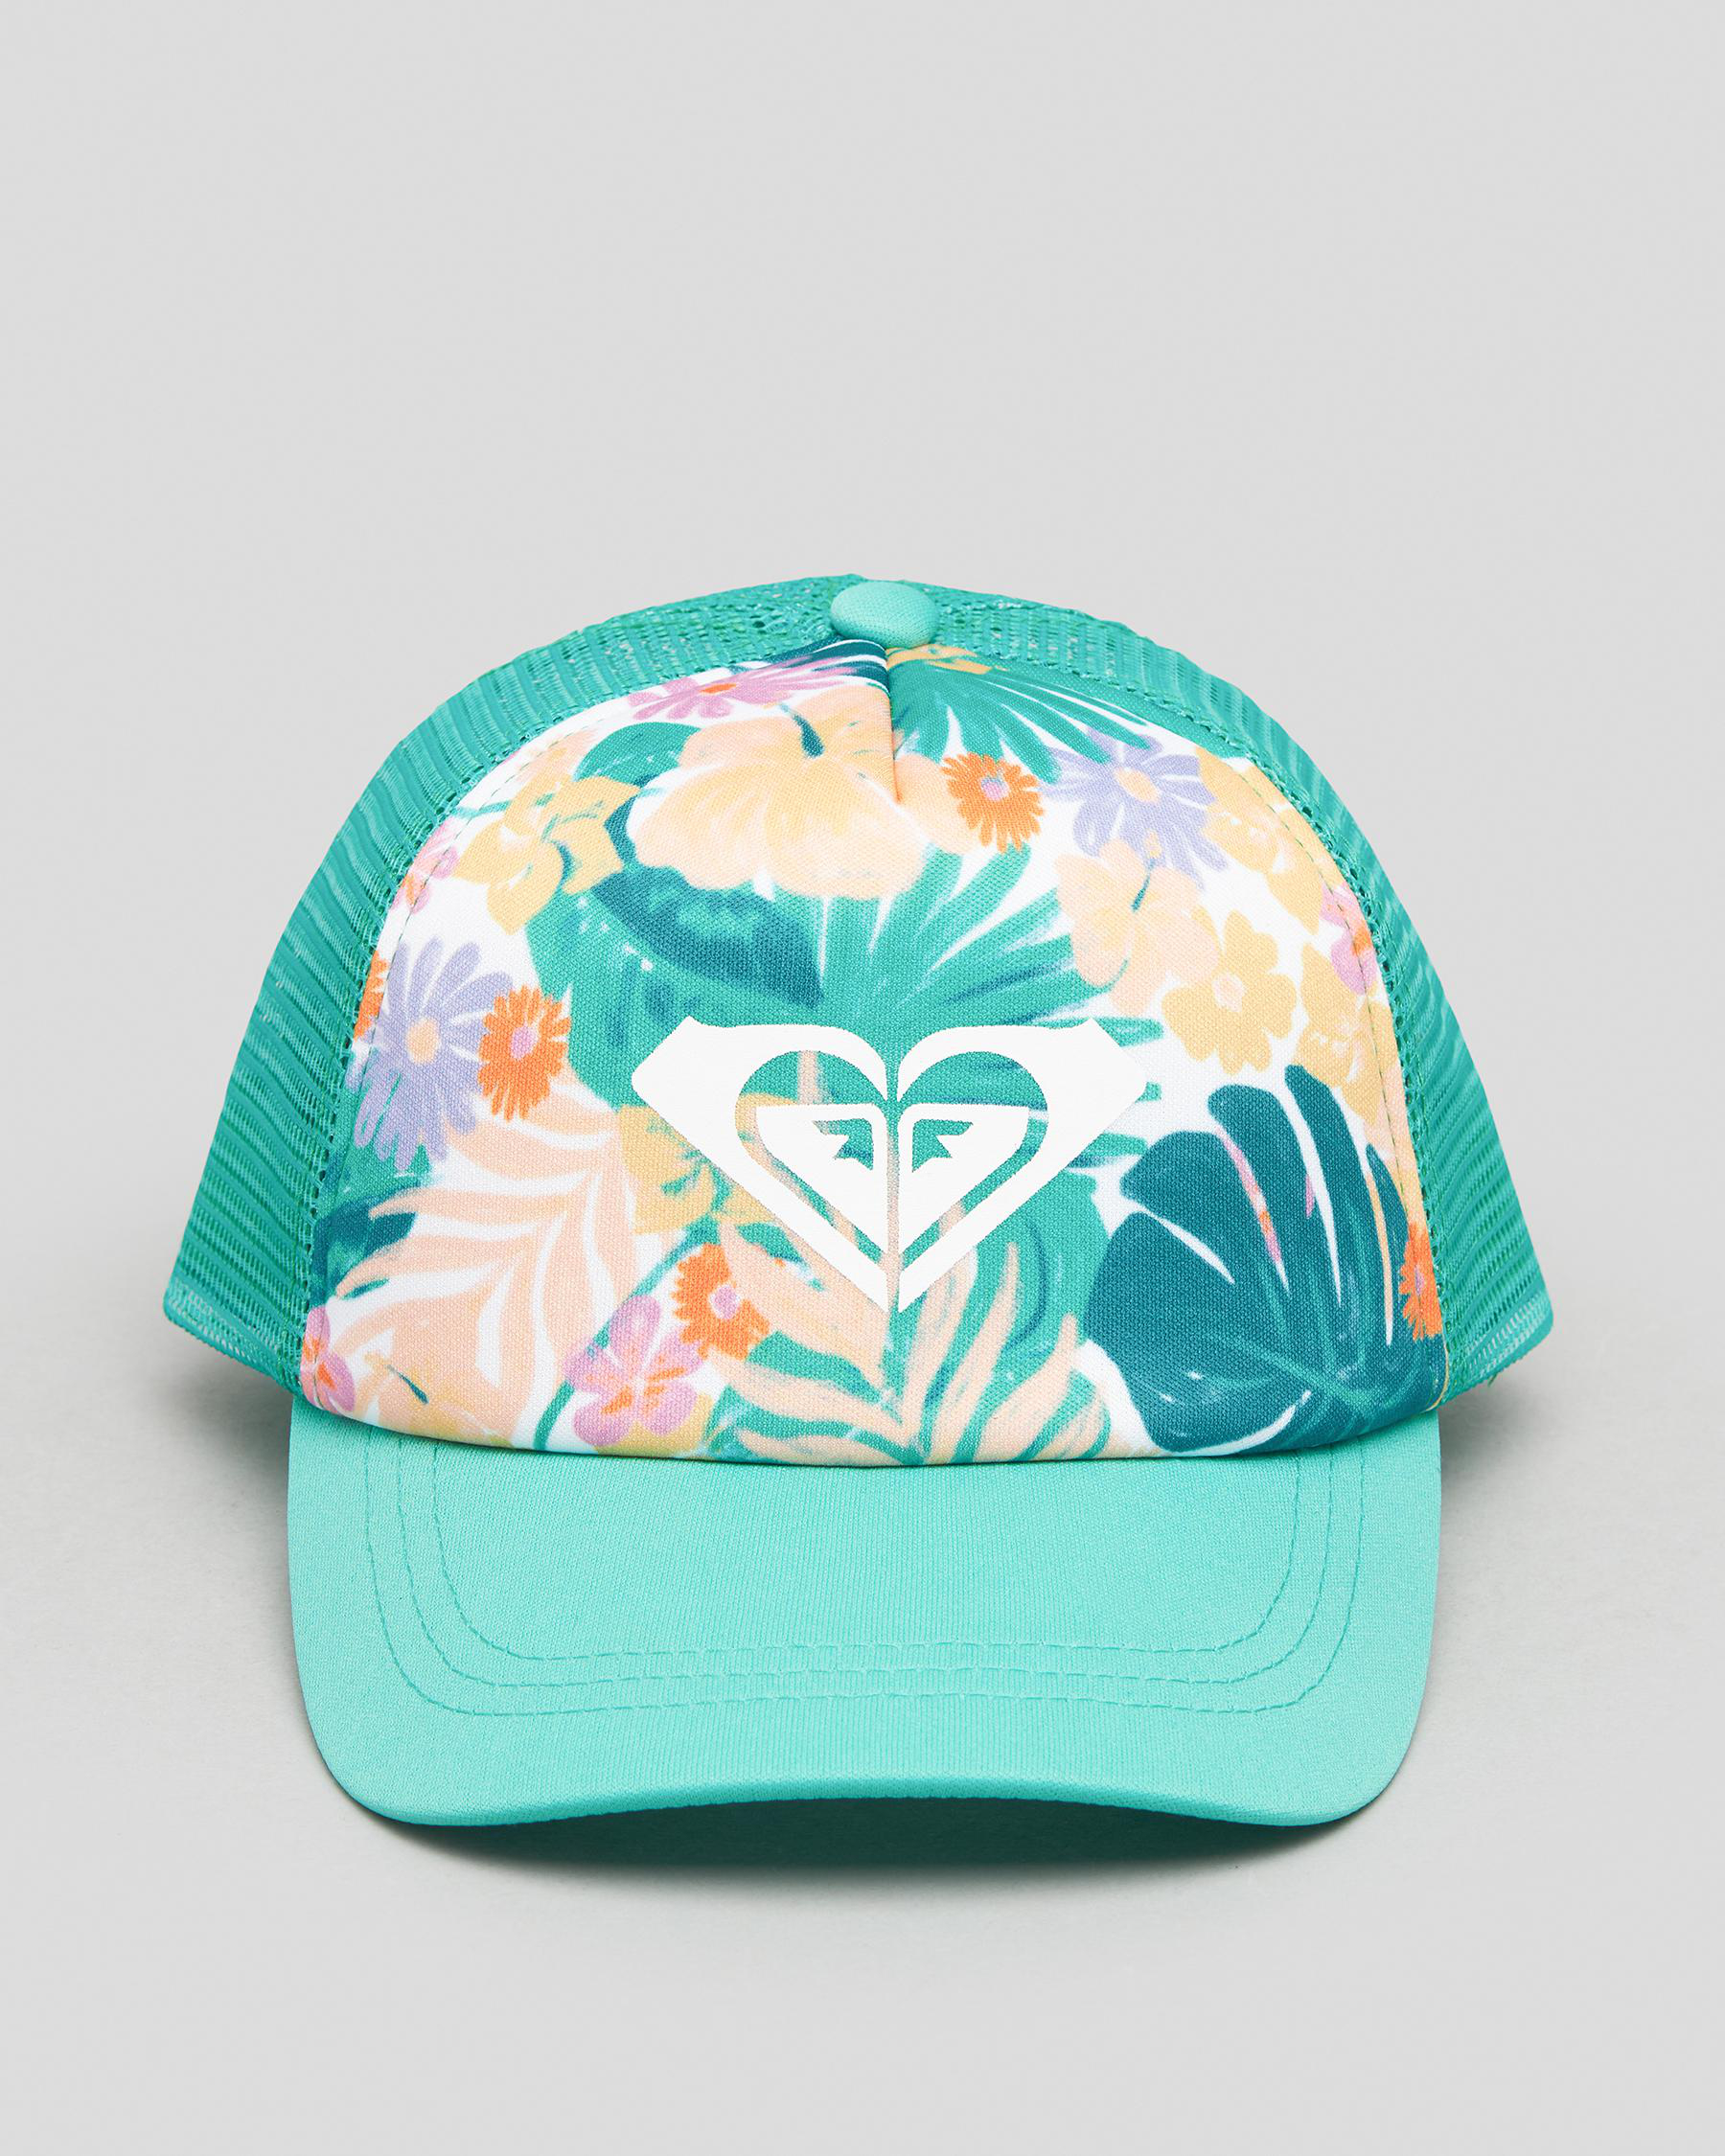 Emotion States In FREE* Toddlers\' Cap Shipping Tropical Returns Roxy Trucker Mint United City - - Sweet Beach Easy & Trails